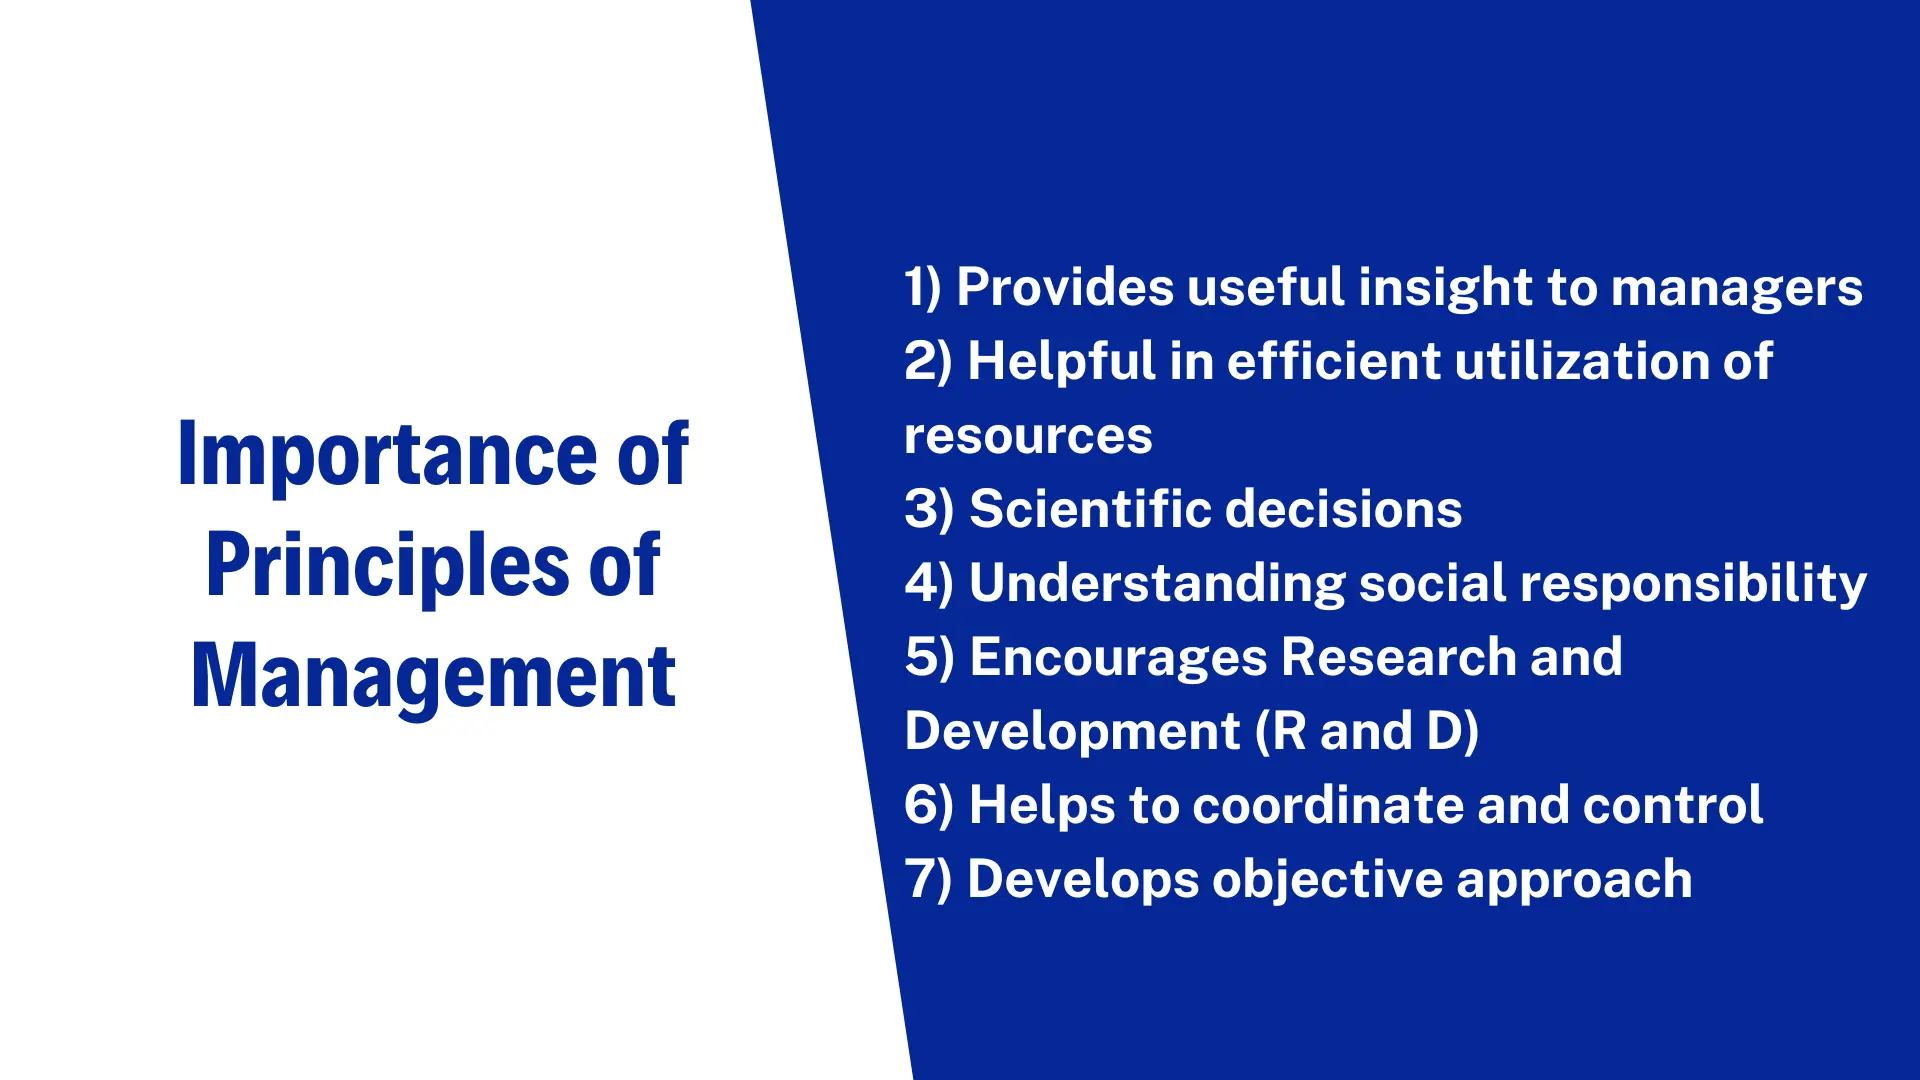 Why is principles of management important?